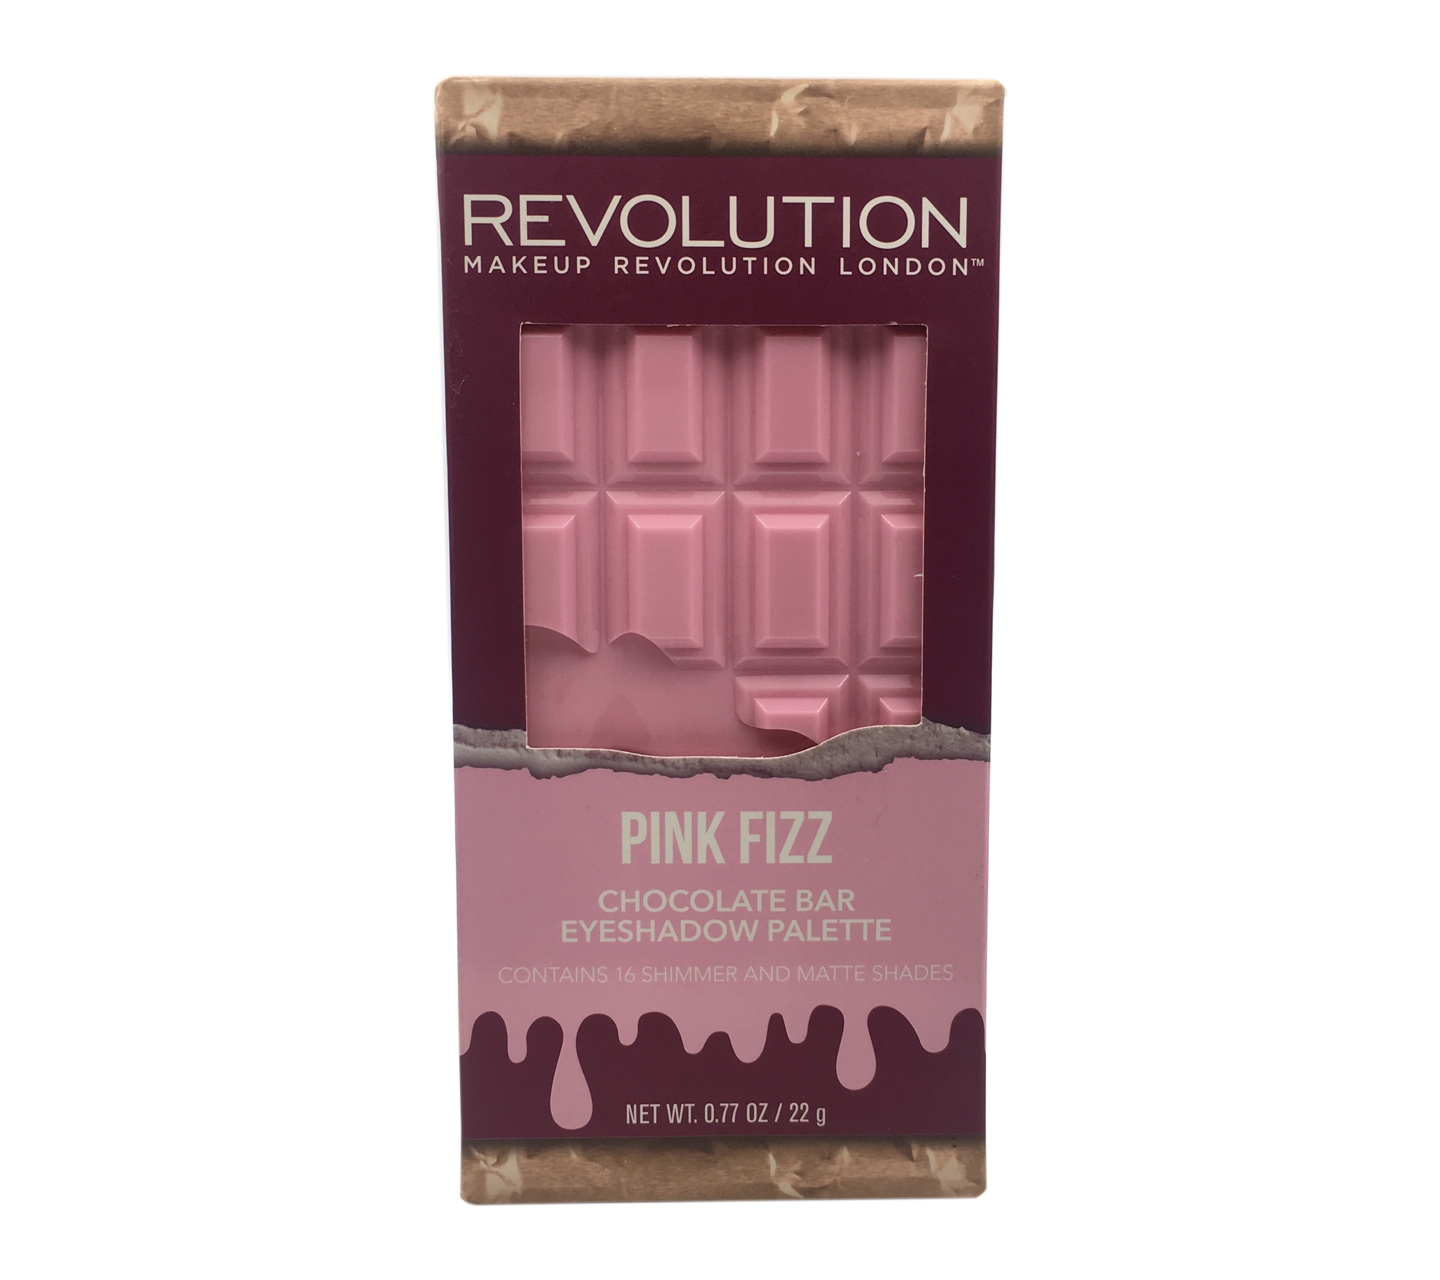 Revolution 16 Shimmer And Matte Shades Pink Fizz Chocolate Bar Ayeshadow Sets And Palette